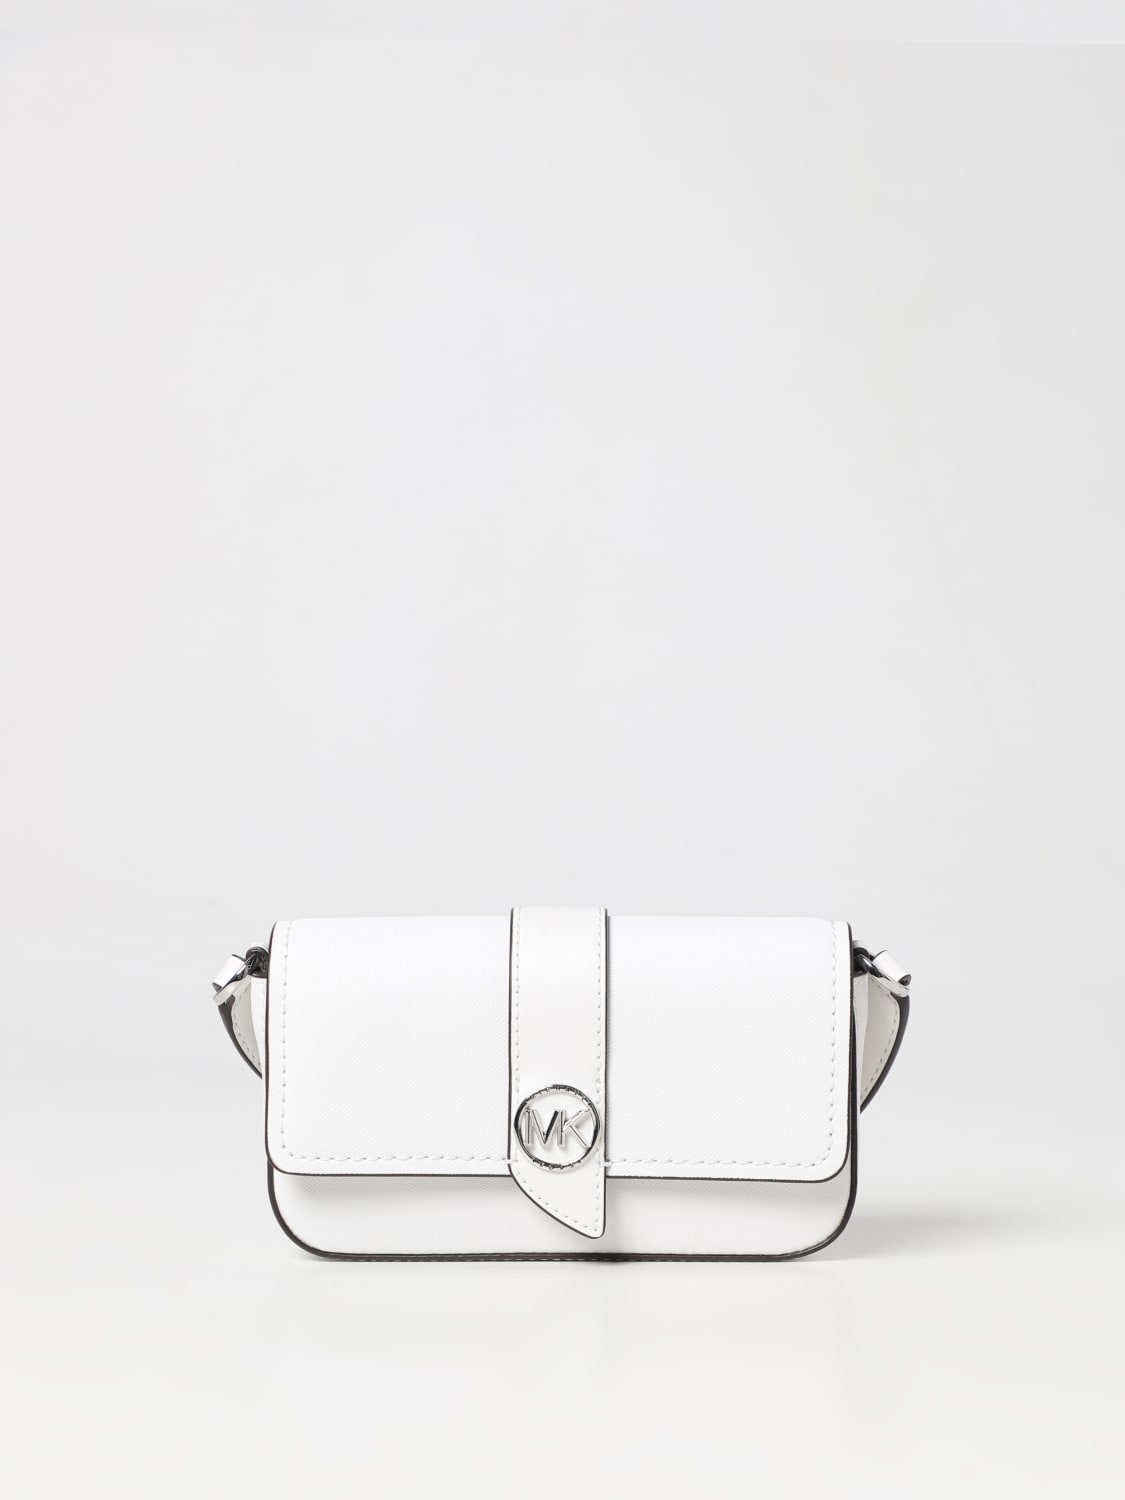 Michael Kors Outlet: Michael Greenwich bag in saffiano leather